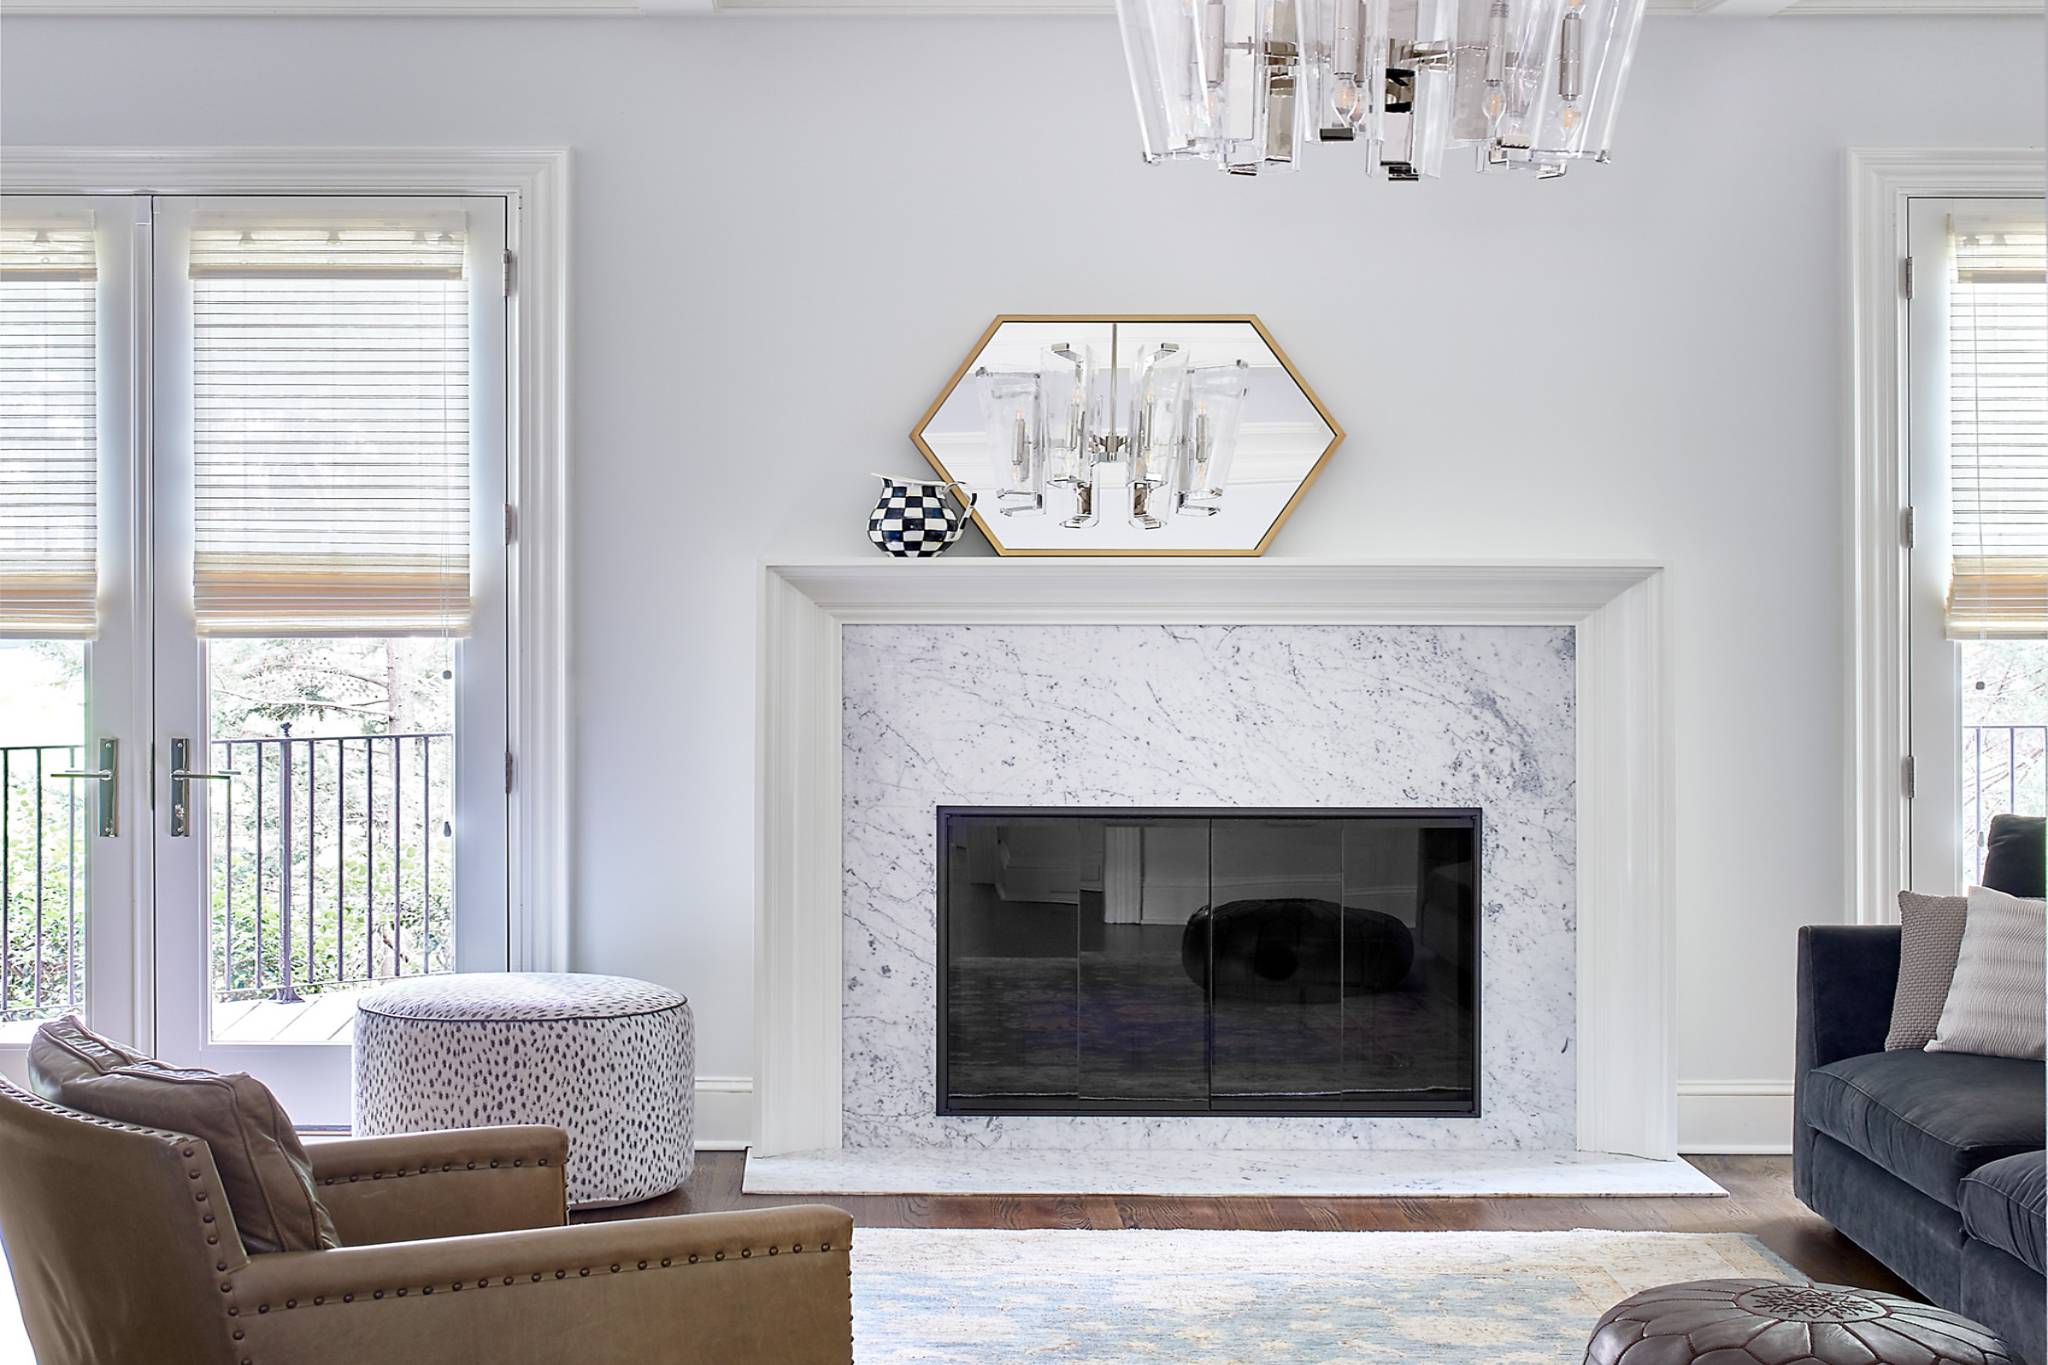 Fireplace between two sets of French doors with white walls, white mantel and fireplace surround, and wood floors.